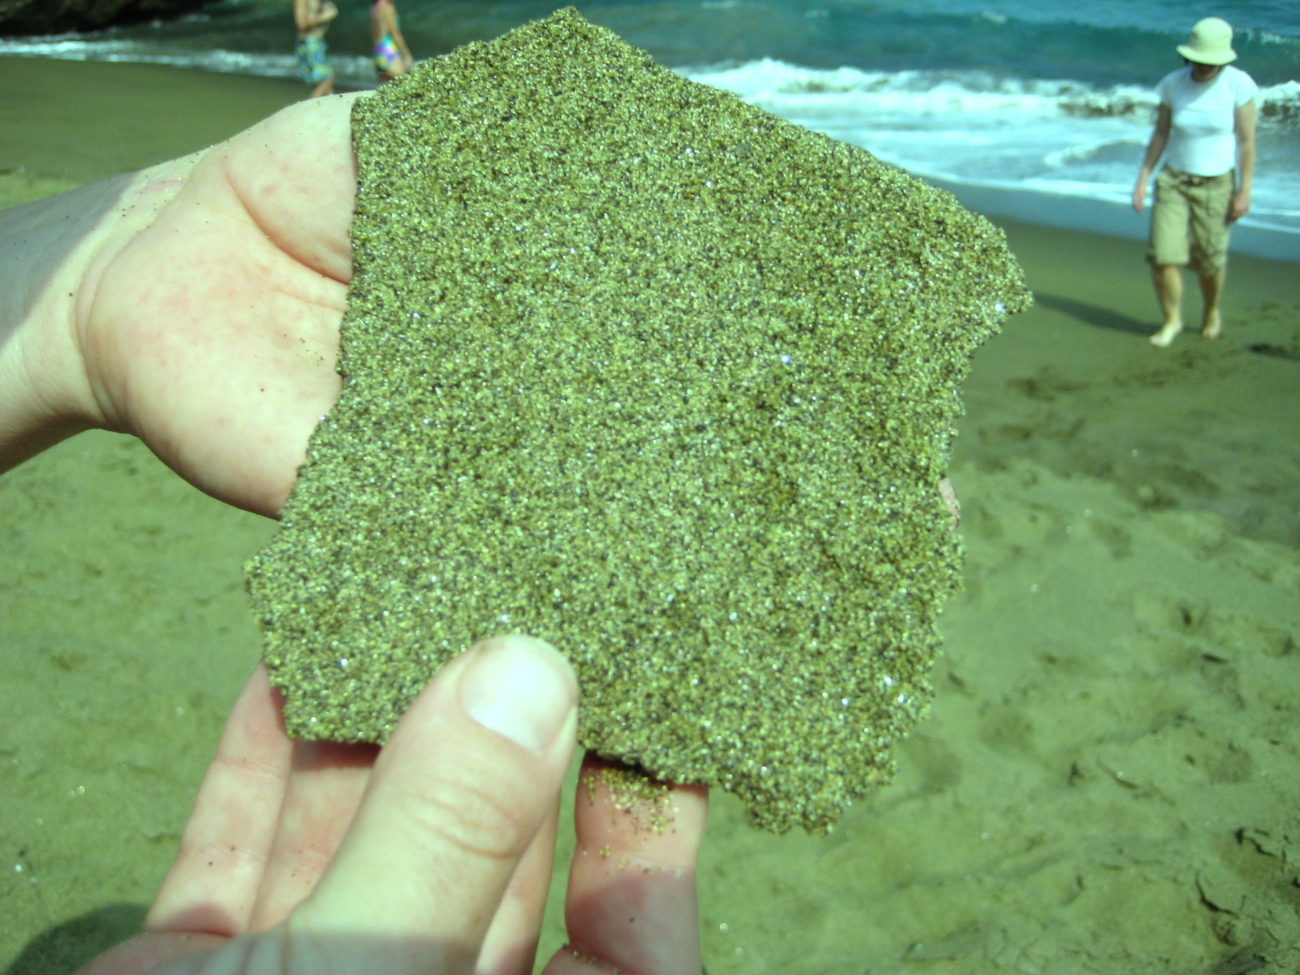 Green glauconitic sands from erosion of volcanic materials